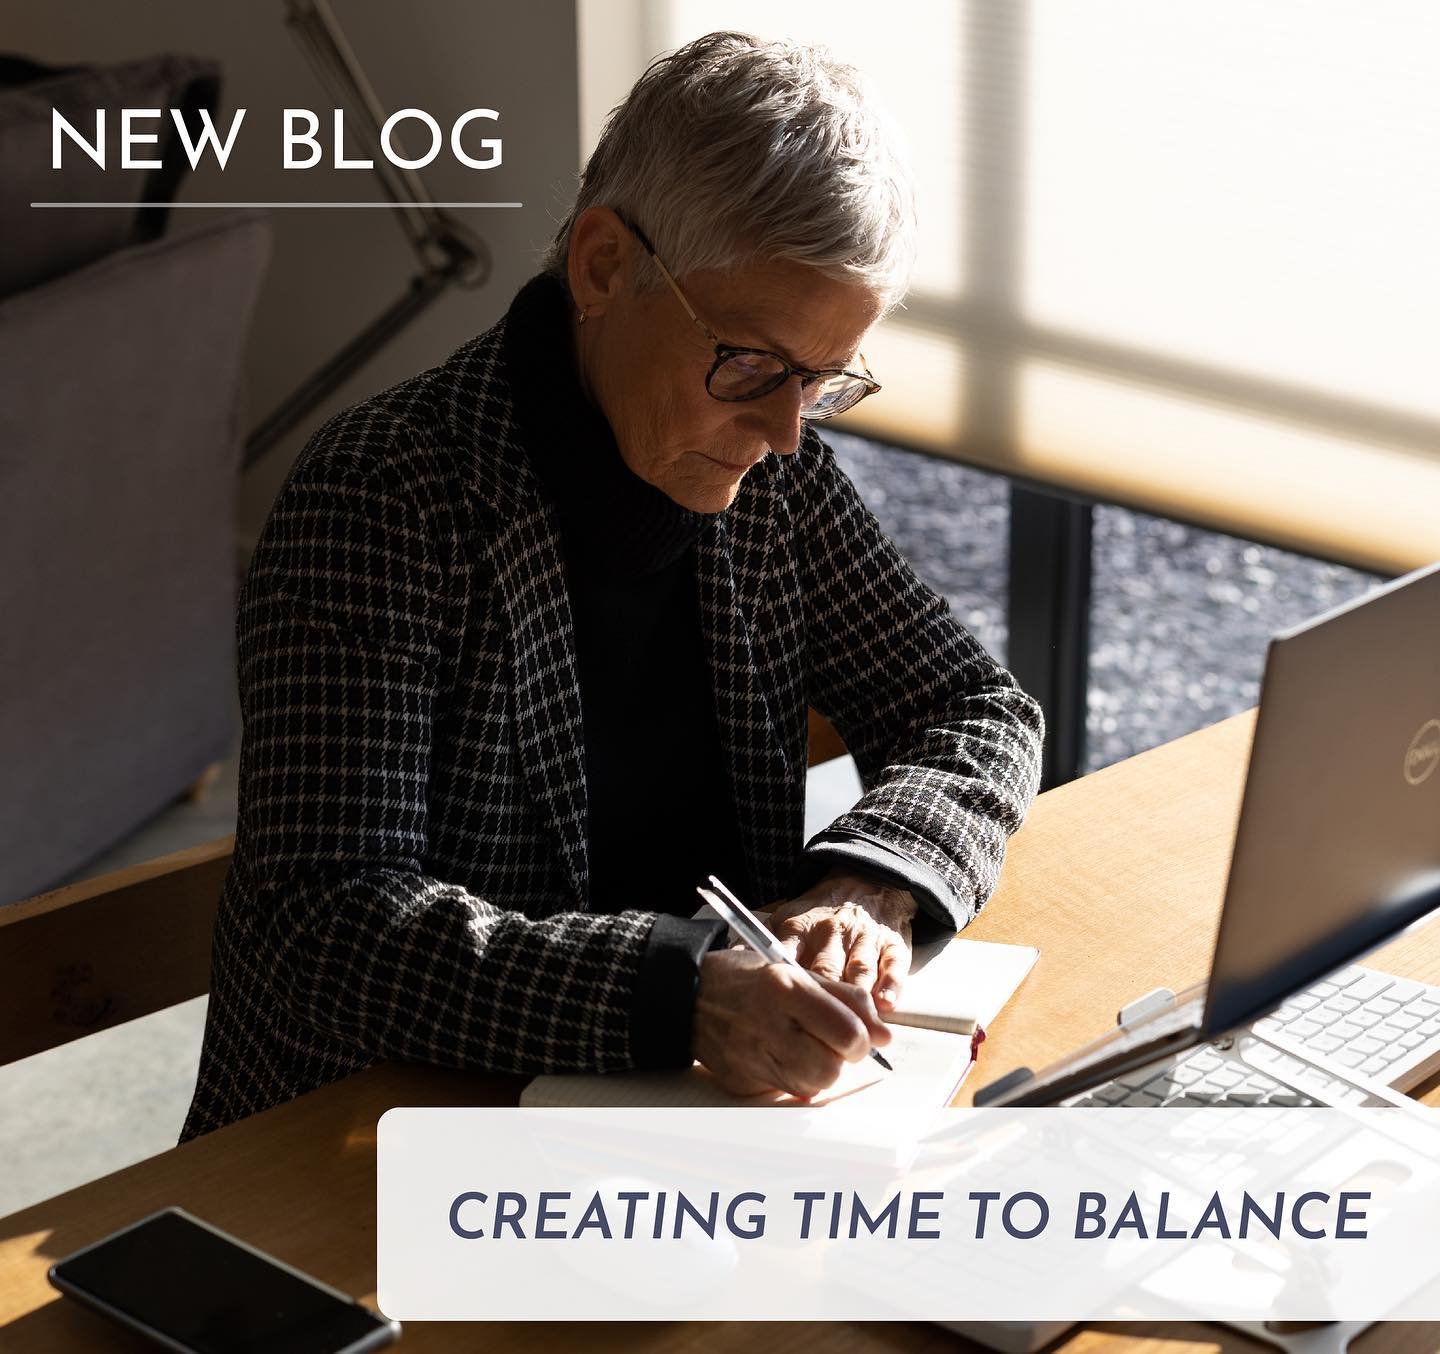 Rounding off a busy month, I am creating time to balance.

In this month&rsquo;s blog, I explore the importance of balance in life, work, and leadership and how that balance looks different for each of us. 

I share:

&bull; My belief that life and w